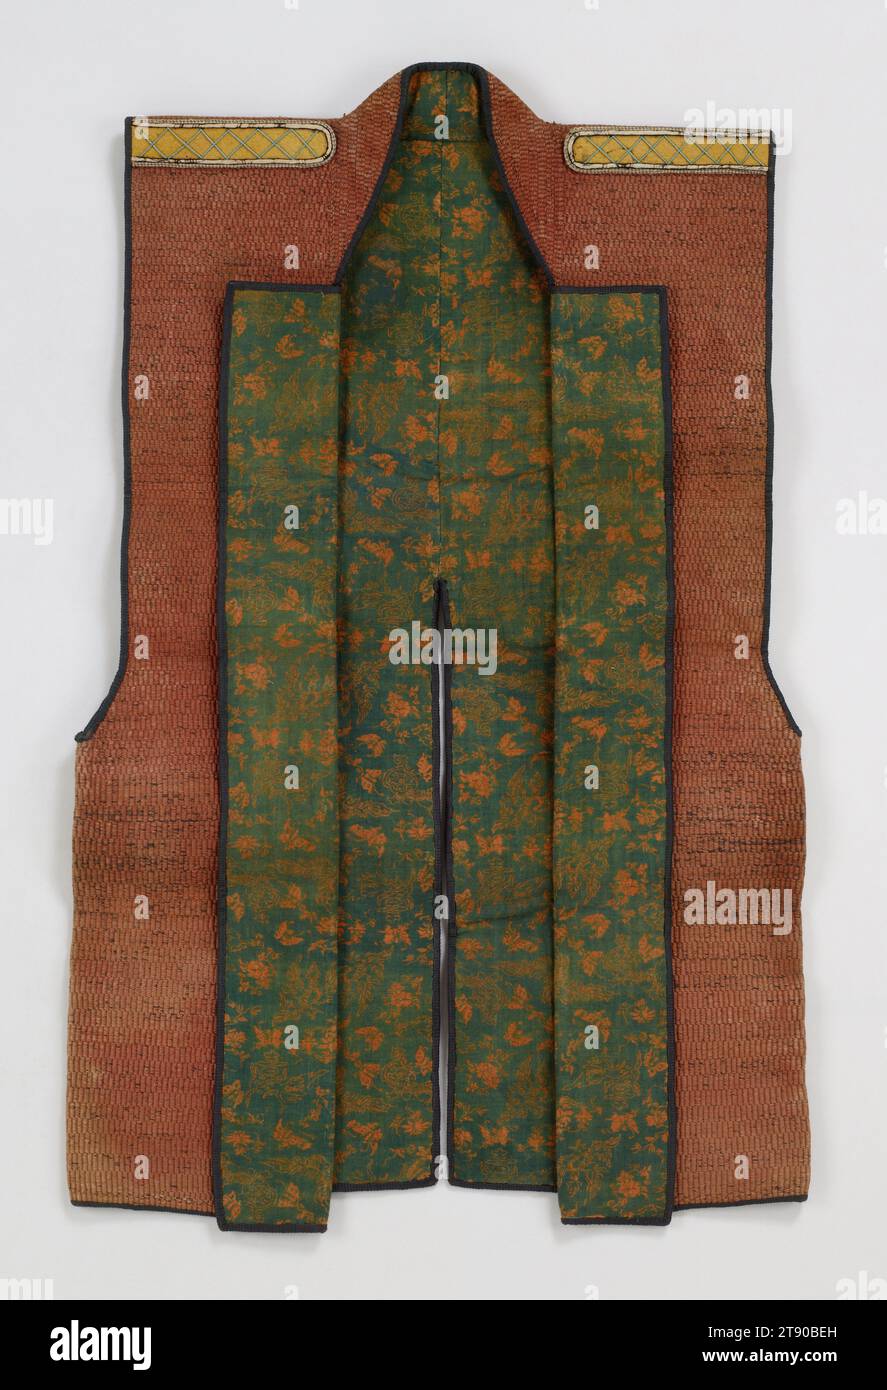 Campaign vest (jinbaori), 19th century, Unknown Japanese, 37 1/2 x 24 1/2 in. (95.25 x 62.23 cm), Paper, wool, silk, metallic thread, Japan, 19th century, In earlier times, samurai wore jackets and trouser suits made from richly colored and patterned silk, beneath relatively little armor. But in the 16th century the style of armor changed to cover more of the body, and these elaborate undergarments were concealed. As a result, high-ranking lords began to wear surcoats over their armor. These garments were often made of luxurious, sometimes imported materials. Flamboyant designs Stock Photo